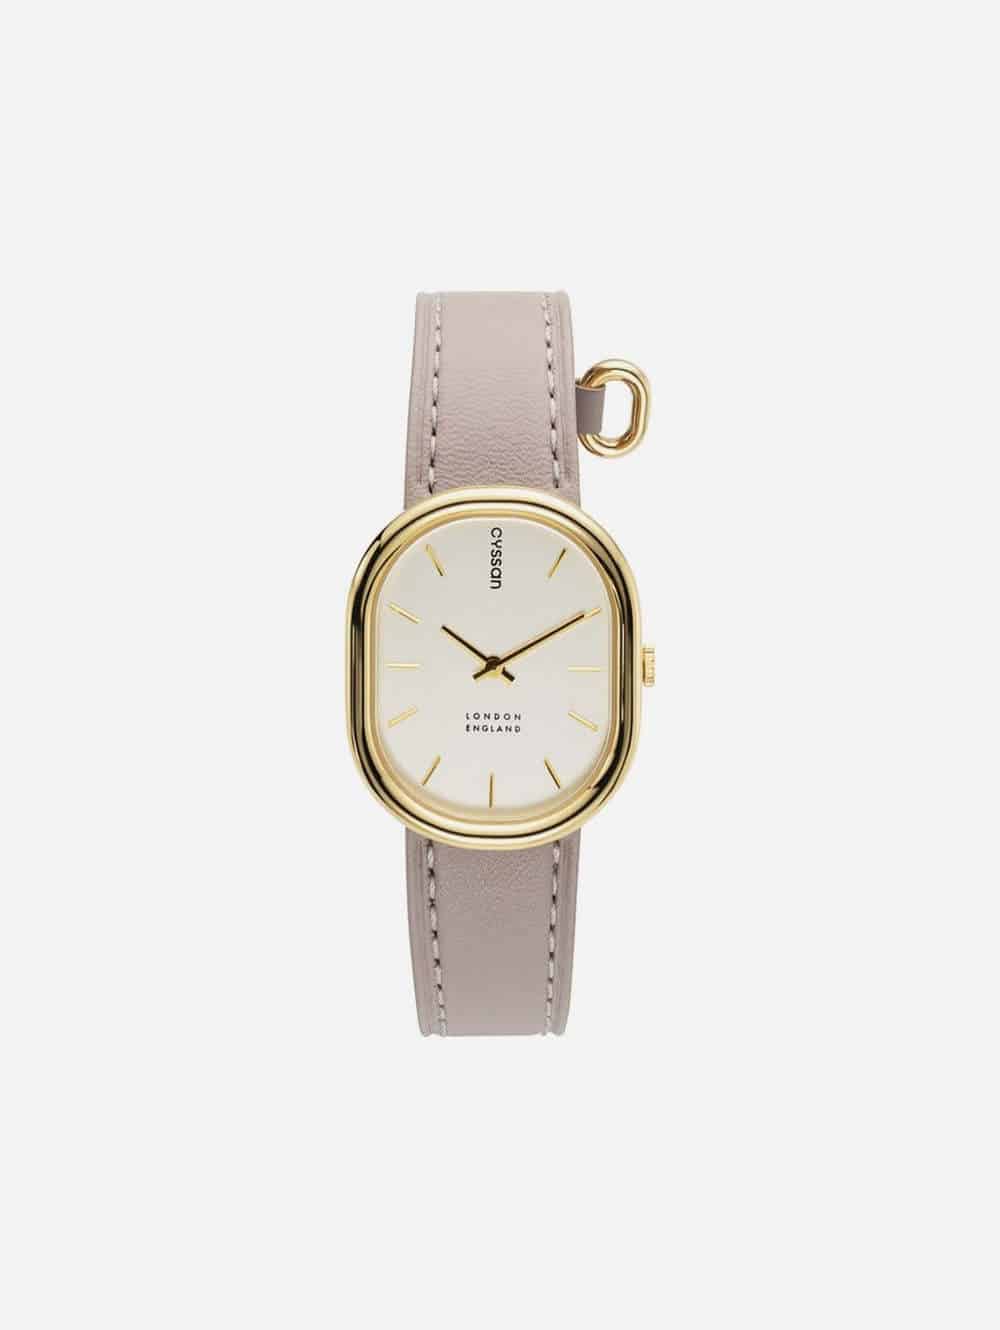 Watch with grey strap, white oval dial and gold hardware